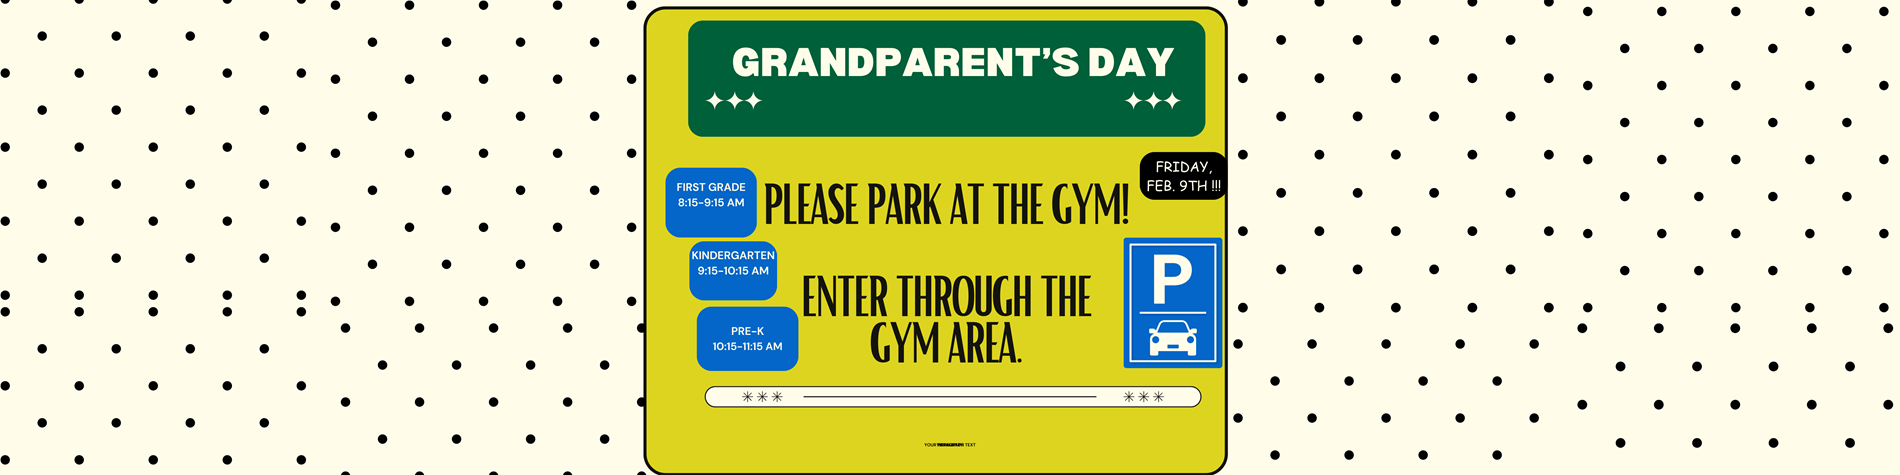 Grandparents Day Parking